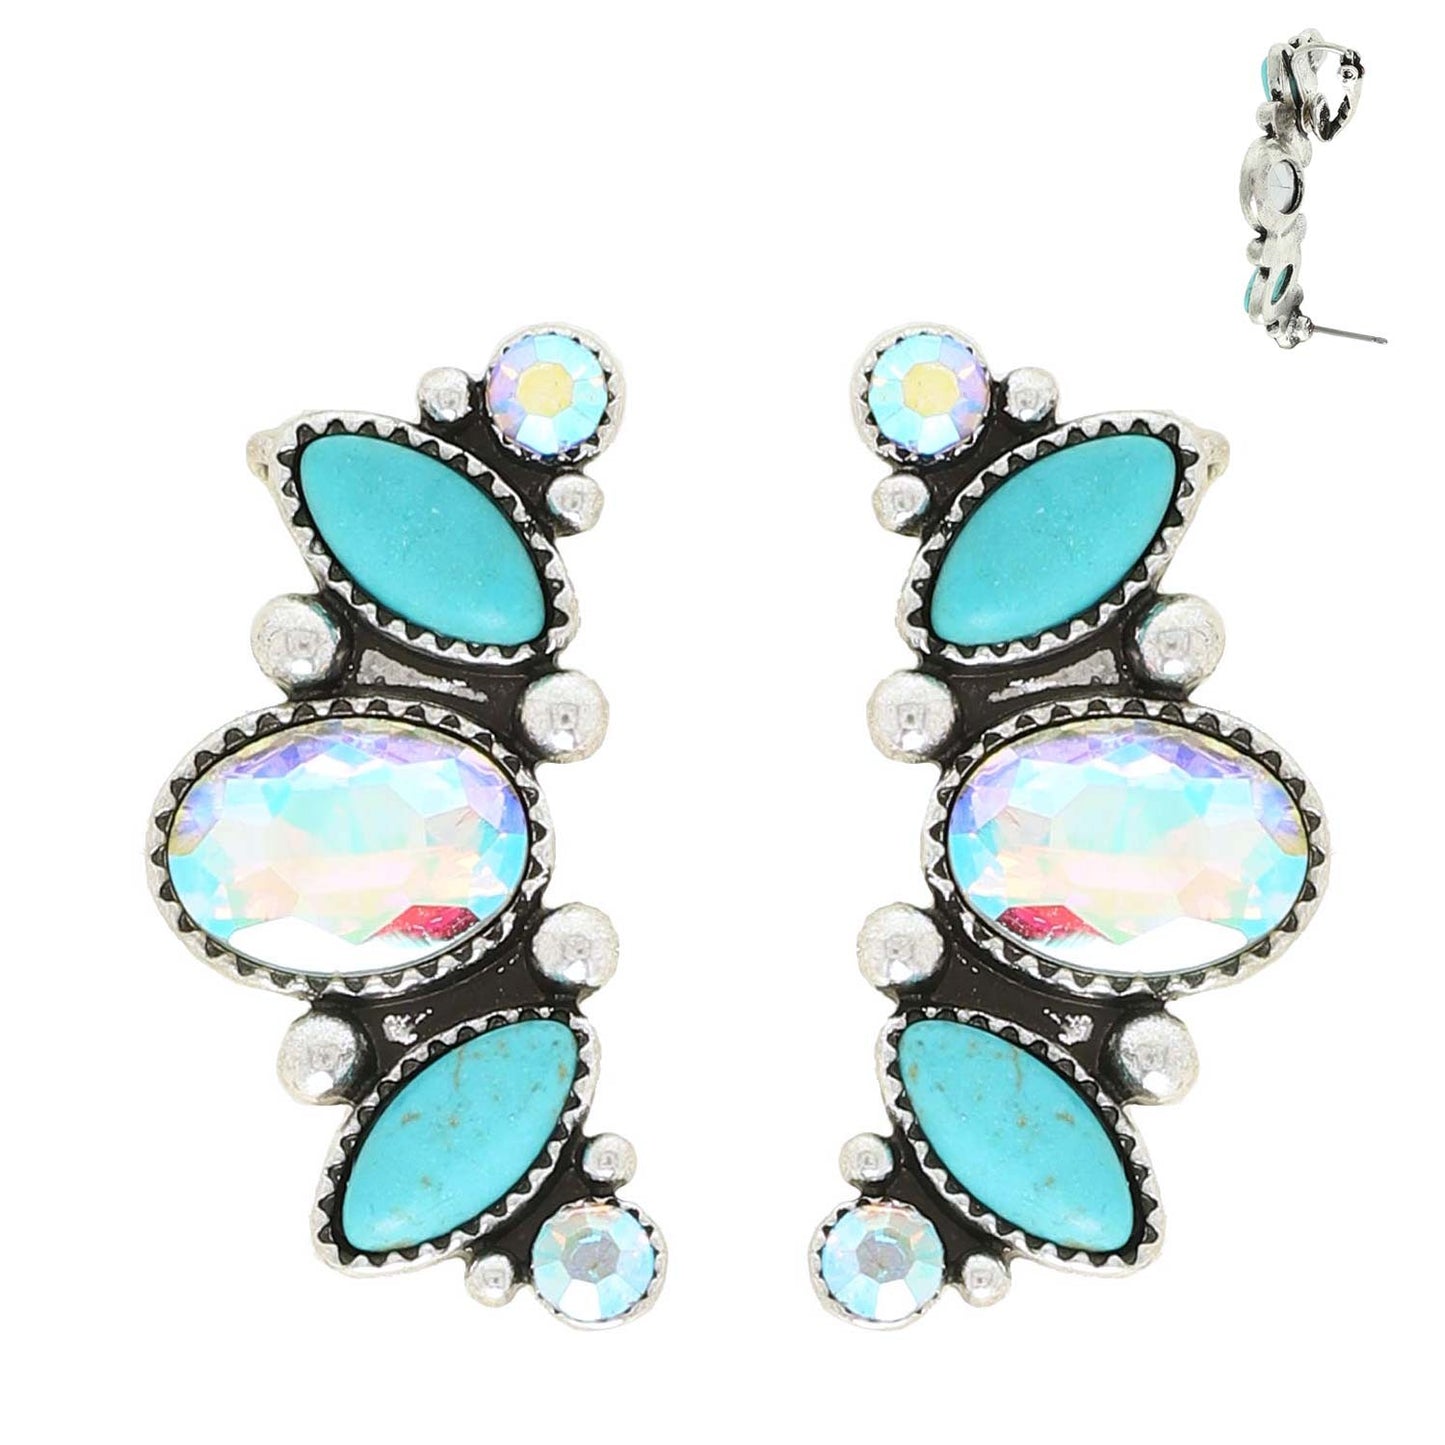 Western Turquoise Climber Earrings